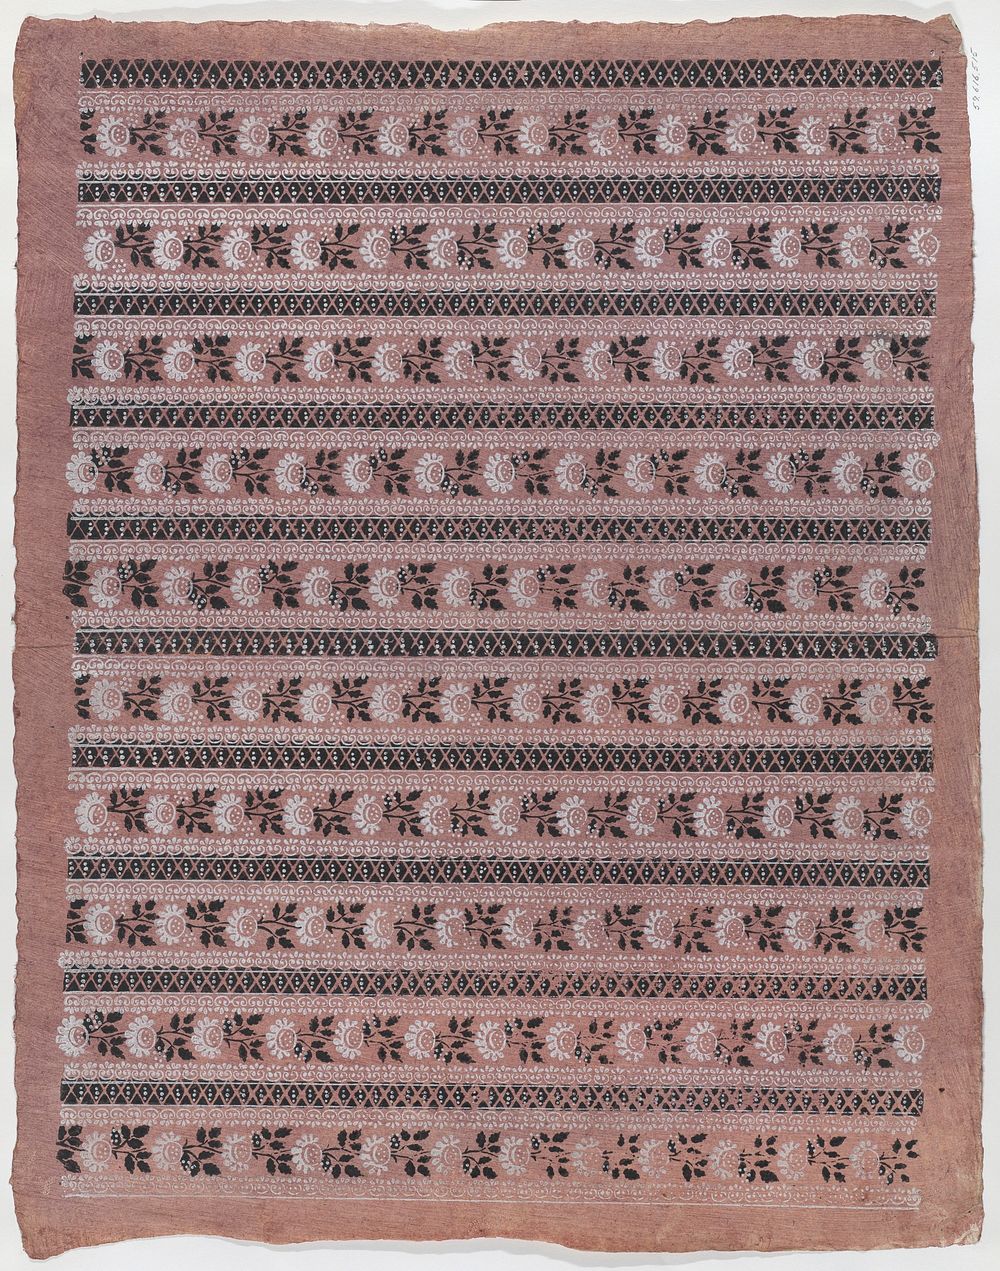 Sheet with ten borders with floral patterns on pale pink background